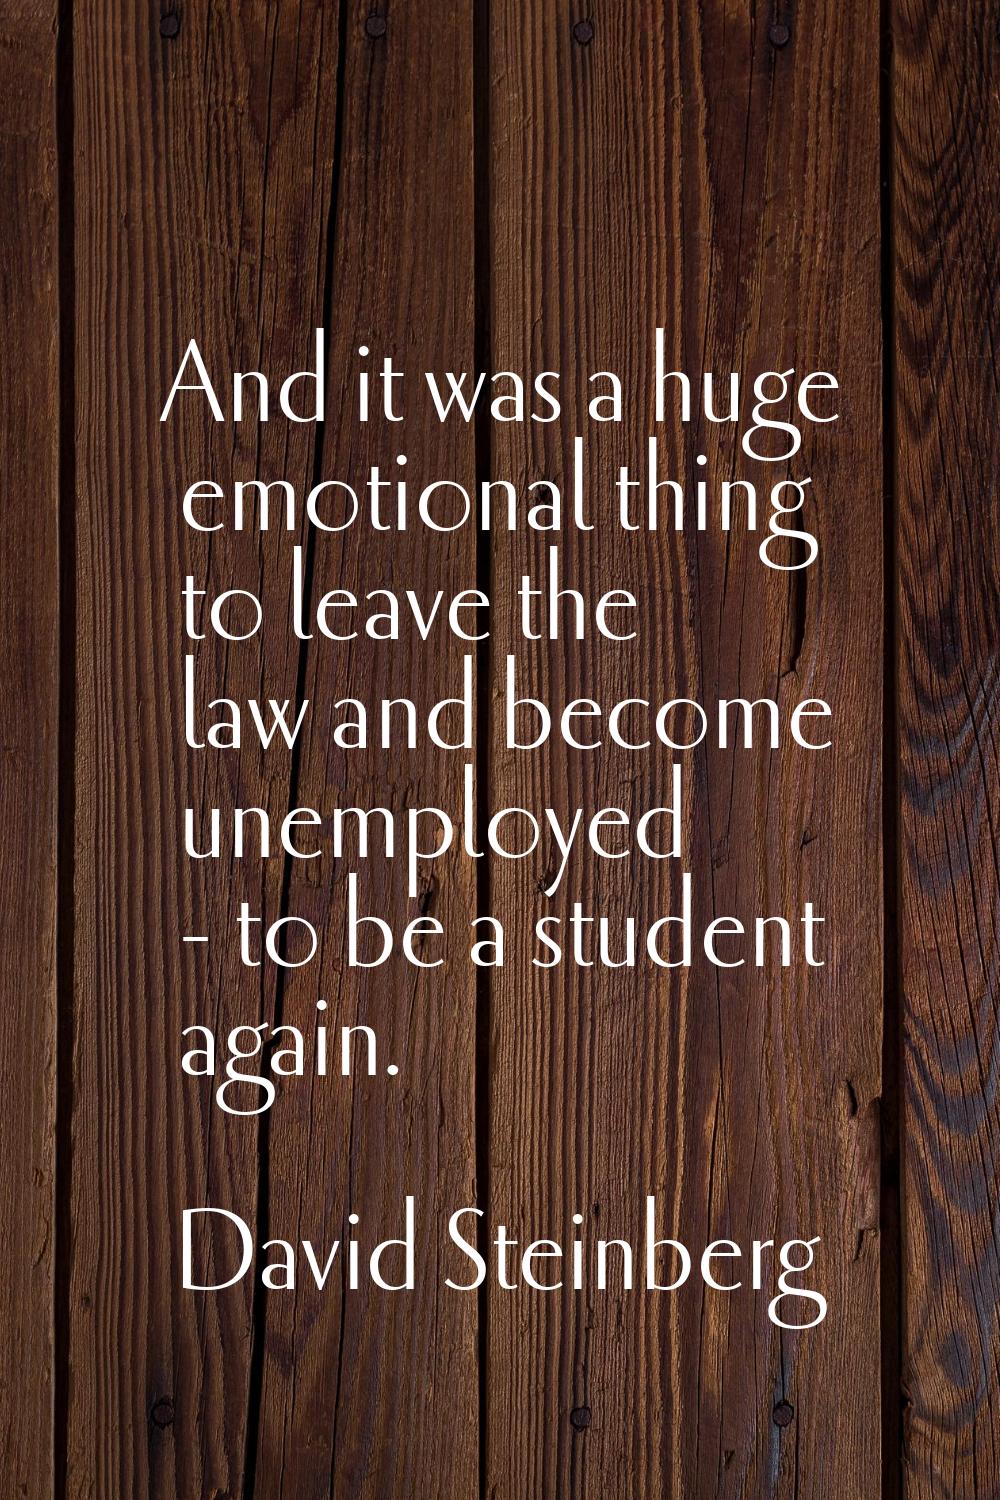 And it was a huge emotional thing to leave the law and become unemployed - to be a student again.